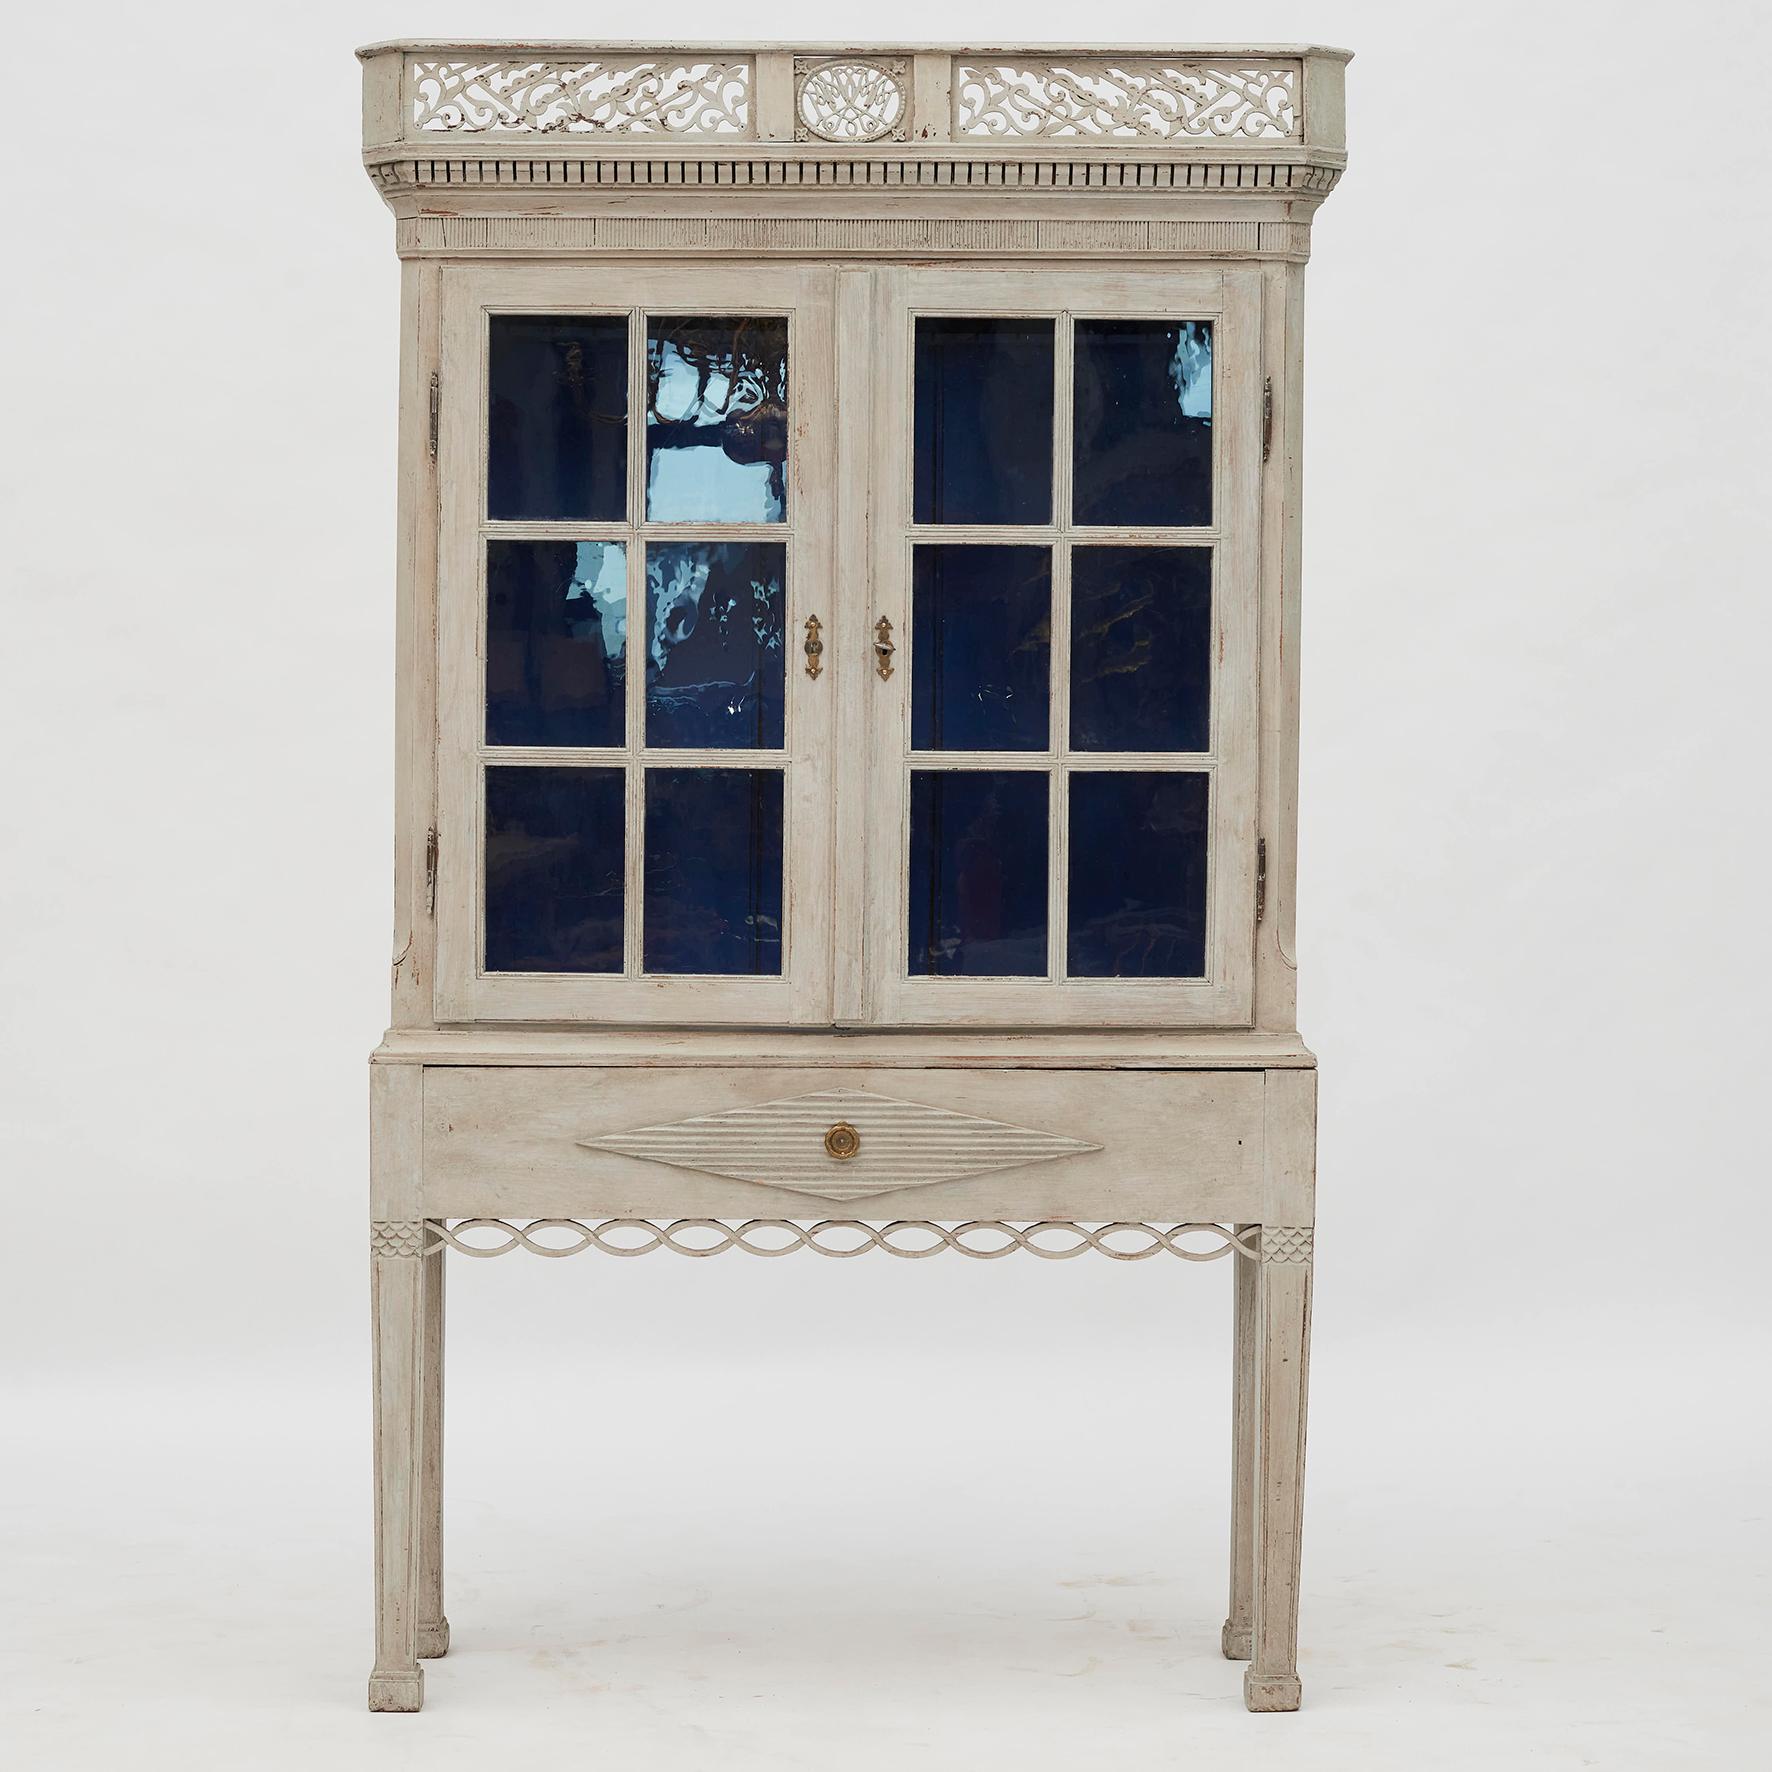 A Beautiful Danish Louis XVI (Gustavian) cabinet with paned glass doors. Light gray color with beautiful blue color inside. Original base with fake drawer front. Denmark, 1780-1790.
It will serve dutifully as a display case or storage cabinet.